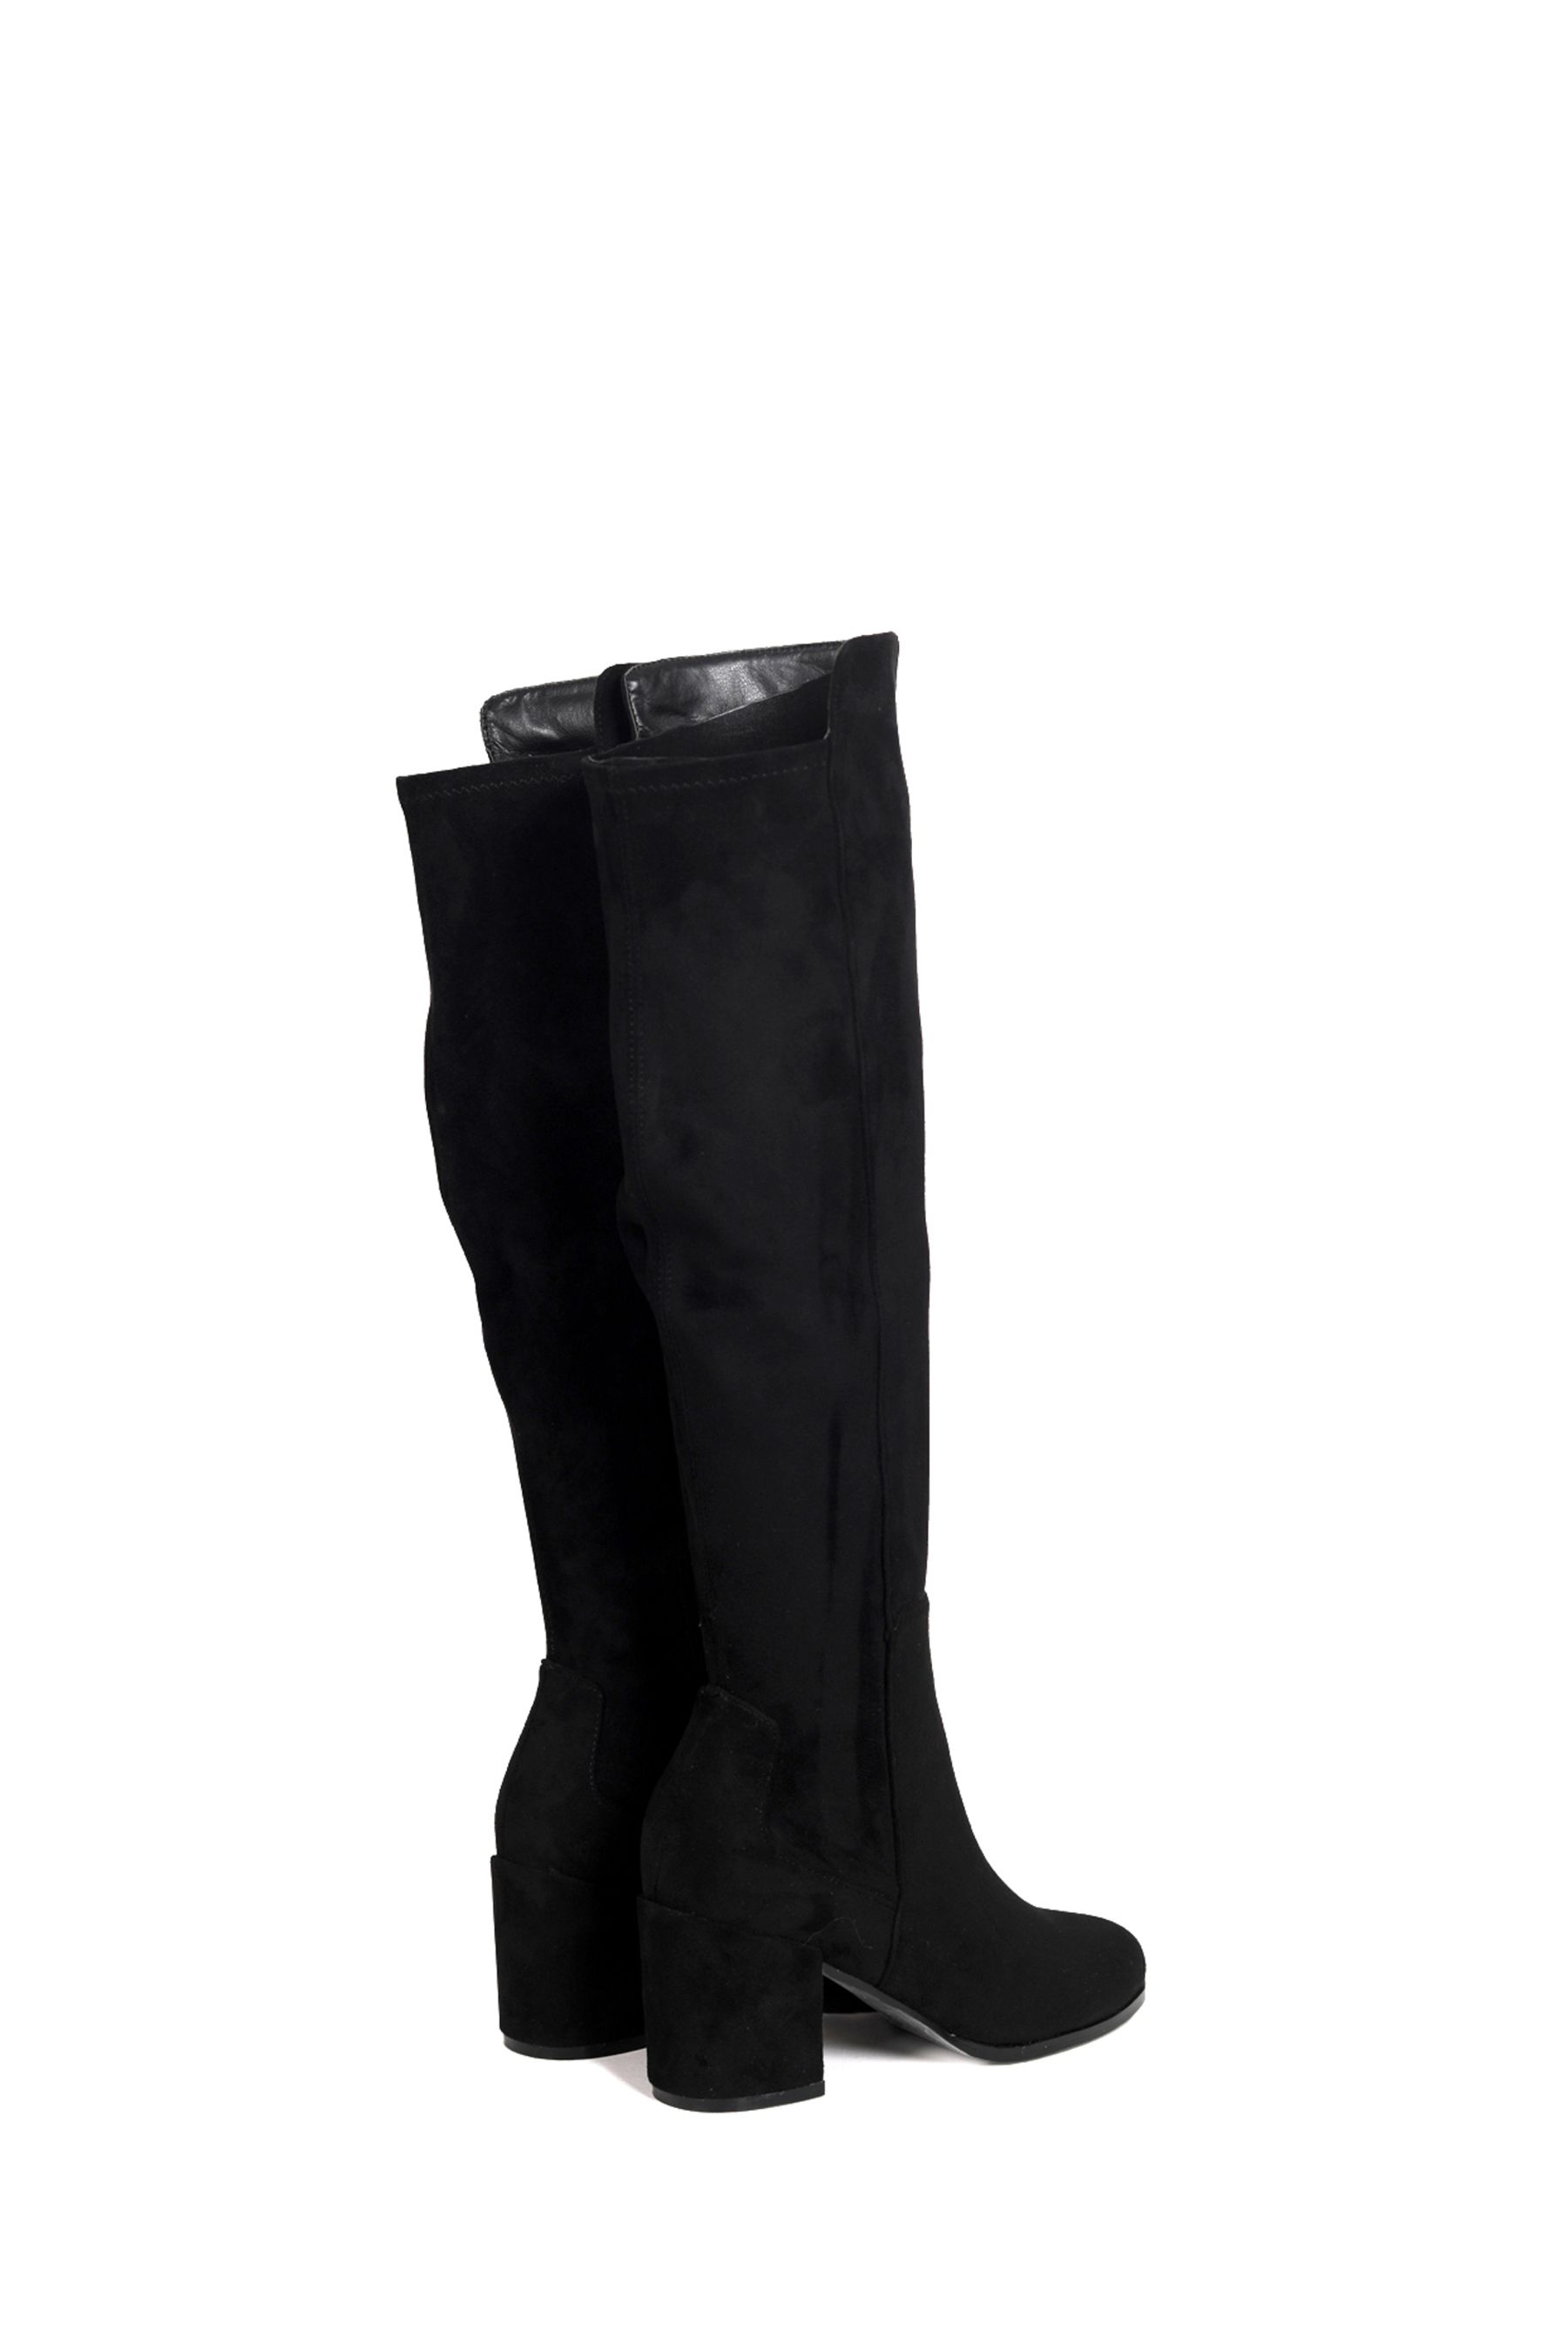 Buy Linzi Black Mandy Faux Suede Block Heeled Knee High Boots from the ...